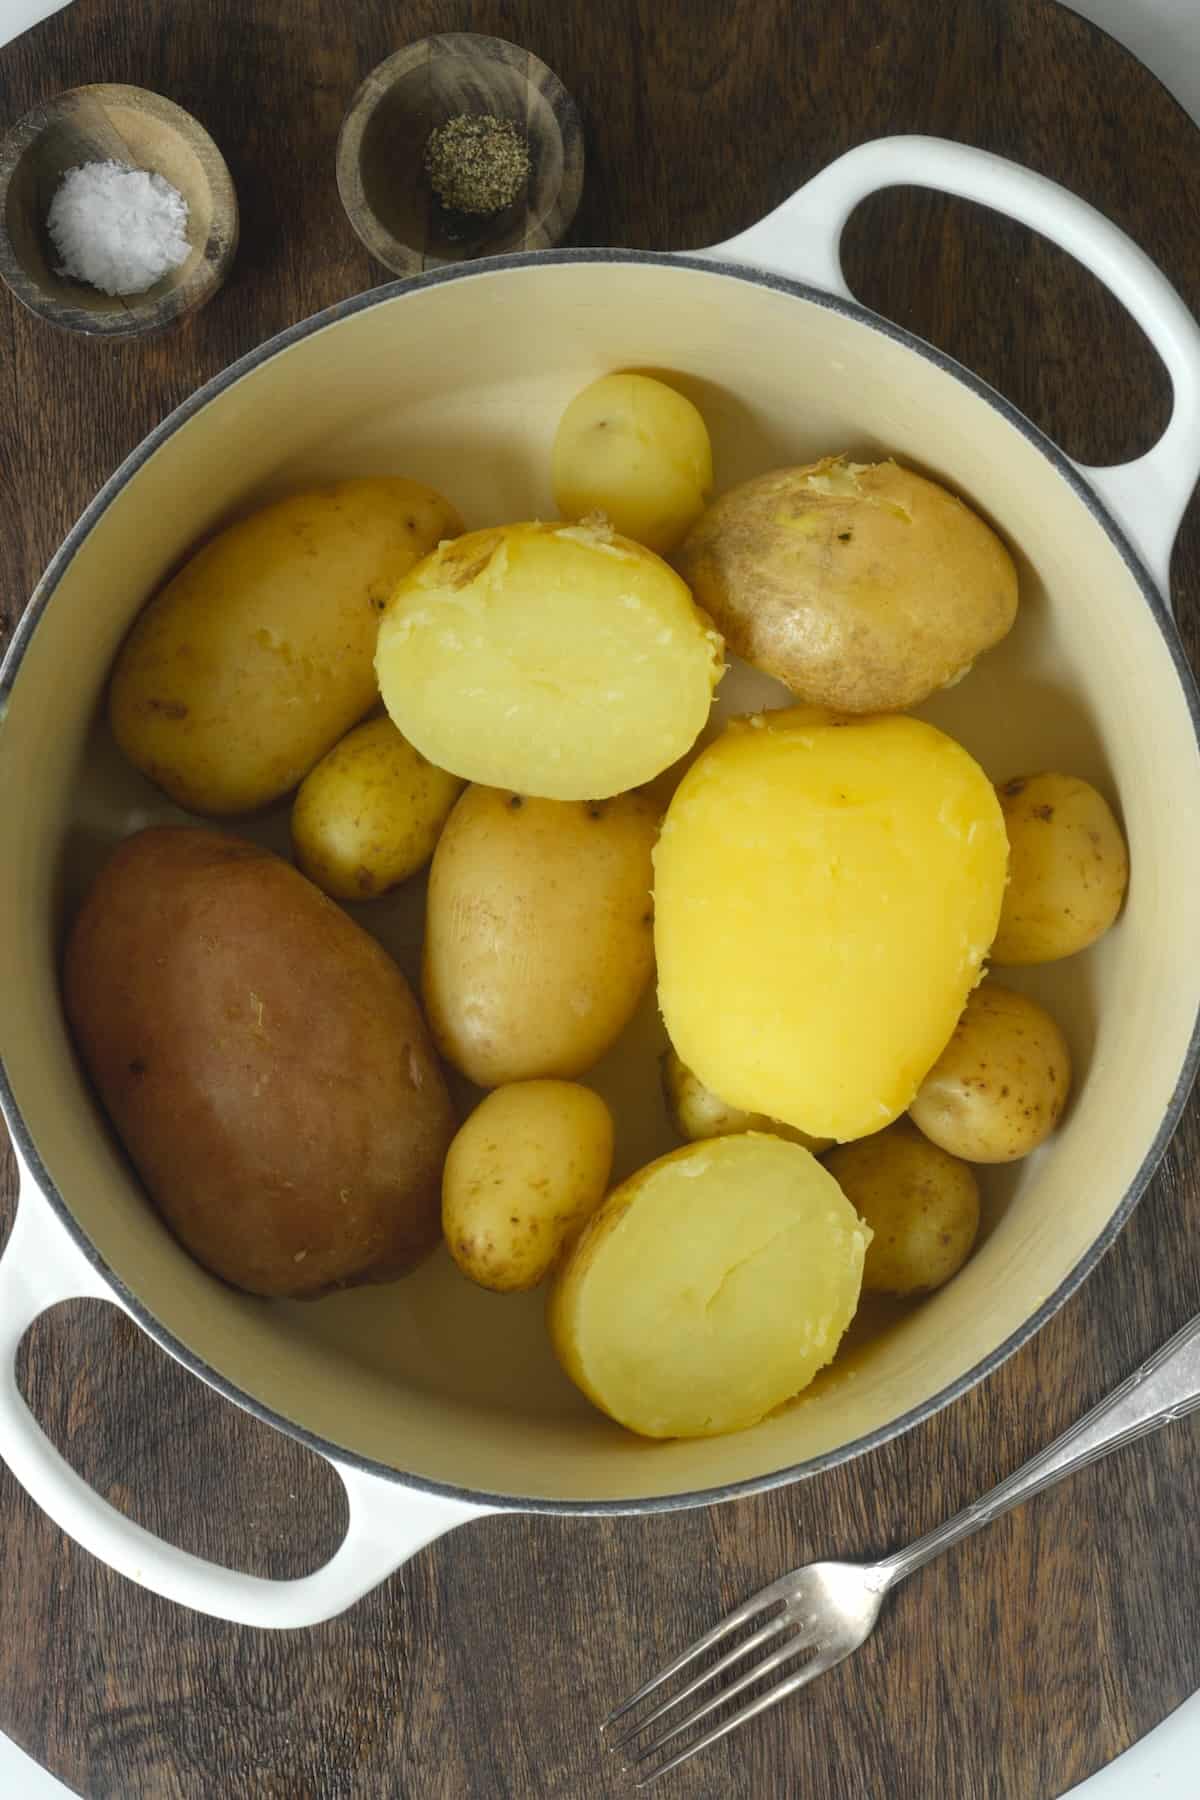 Boiled whole and halved potatoes in a pot